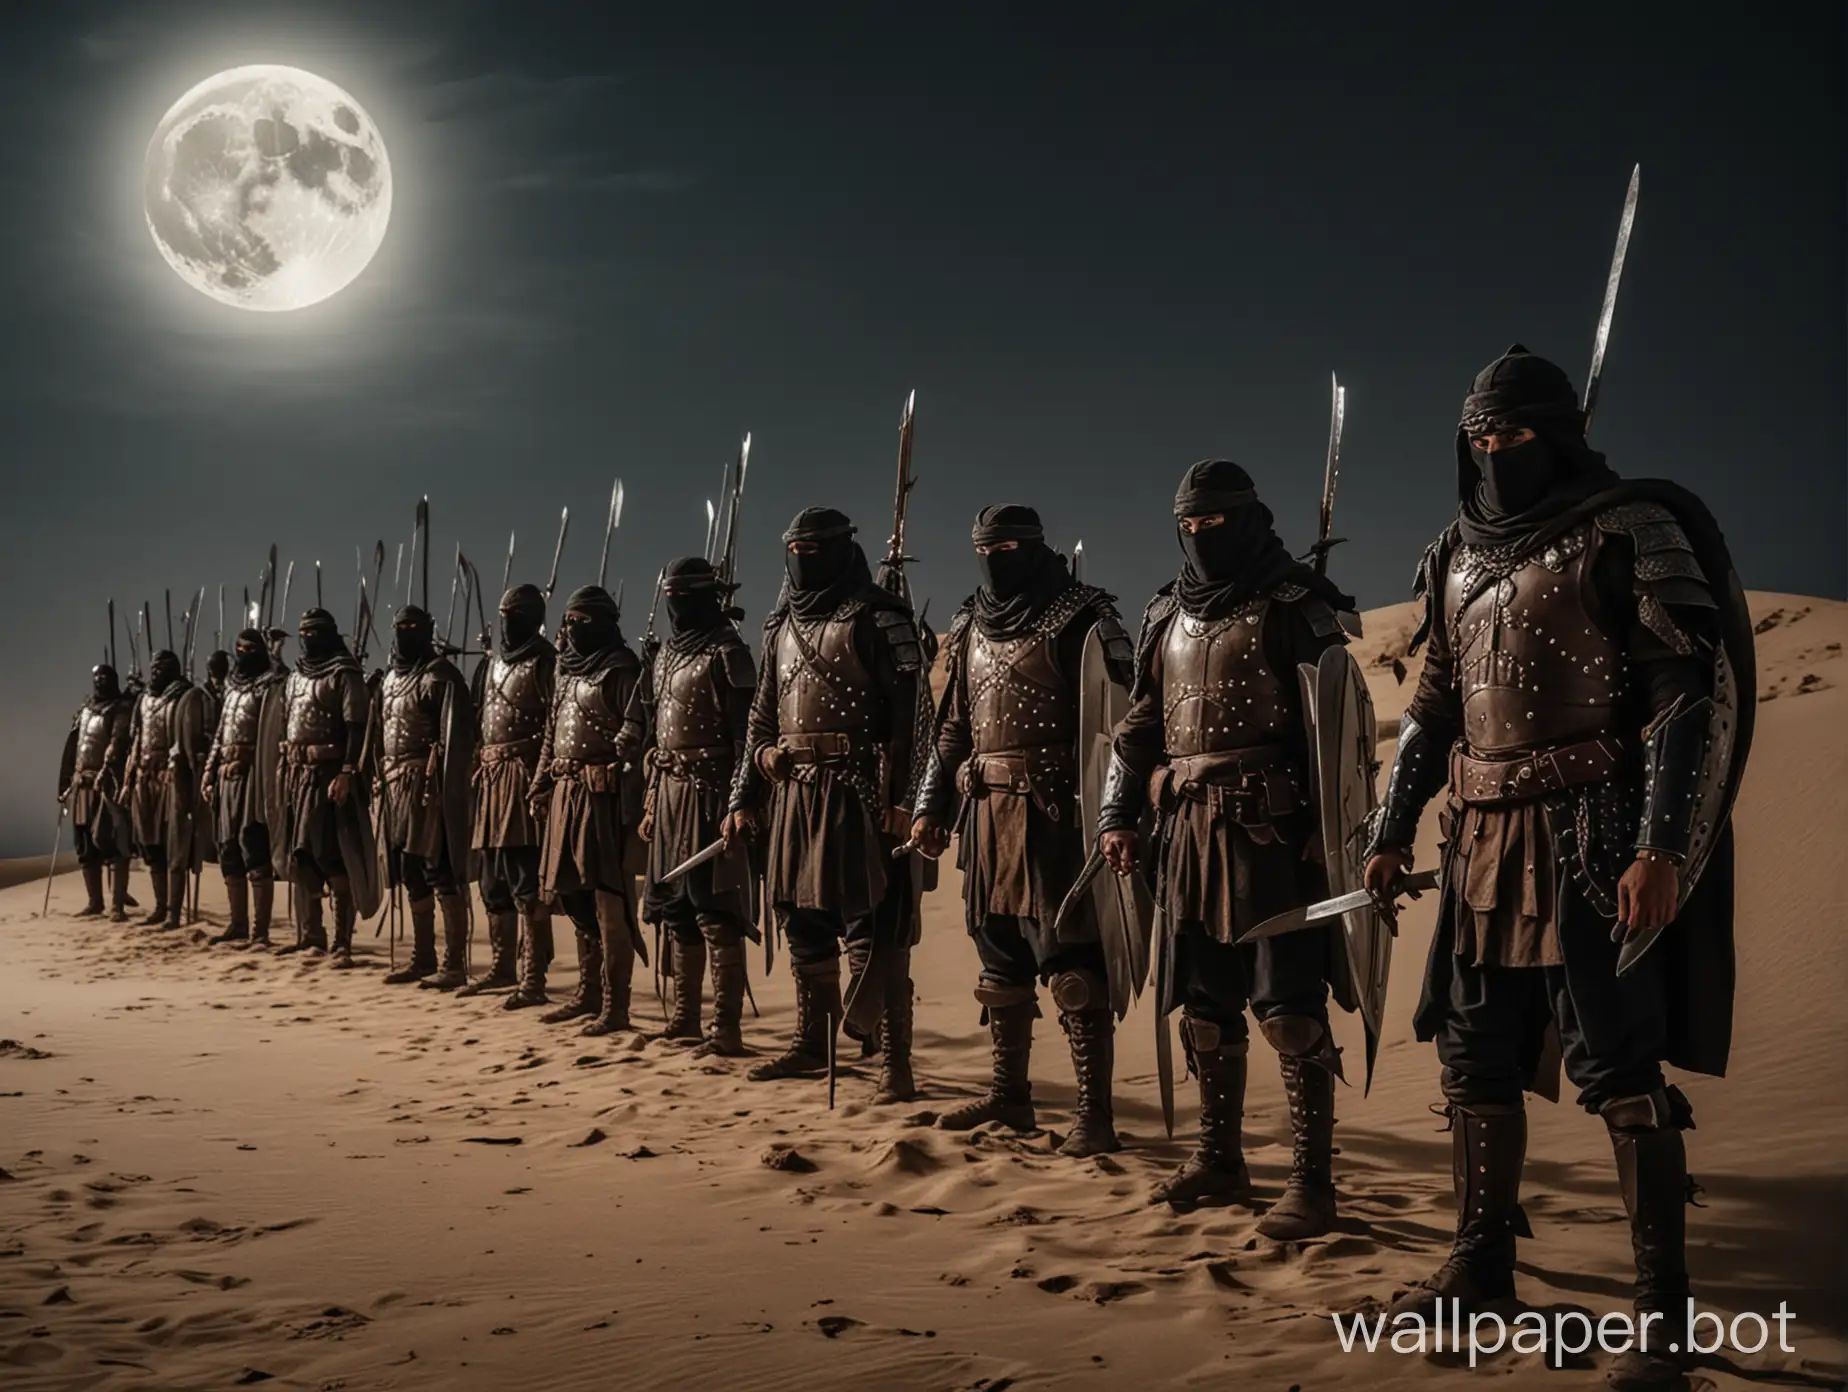 An Arab army in leather armor standing in rows with shields in front and scimitar swords in hand on a dune at night under a full moon, waiting for the enemy impact.